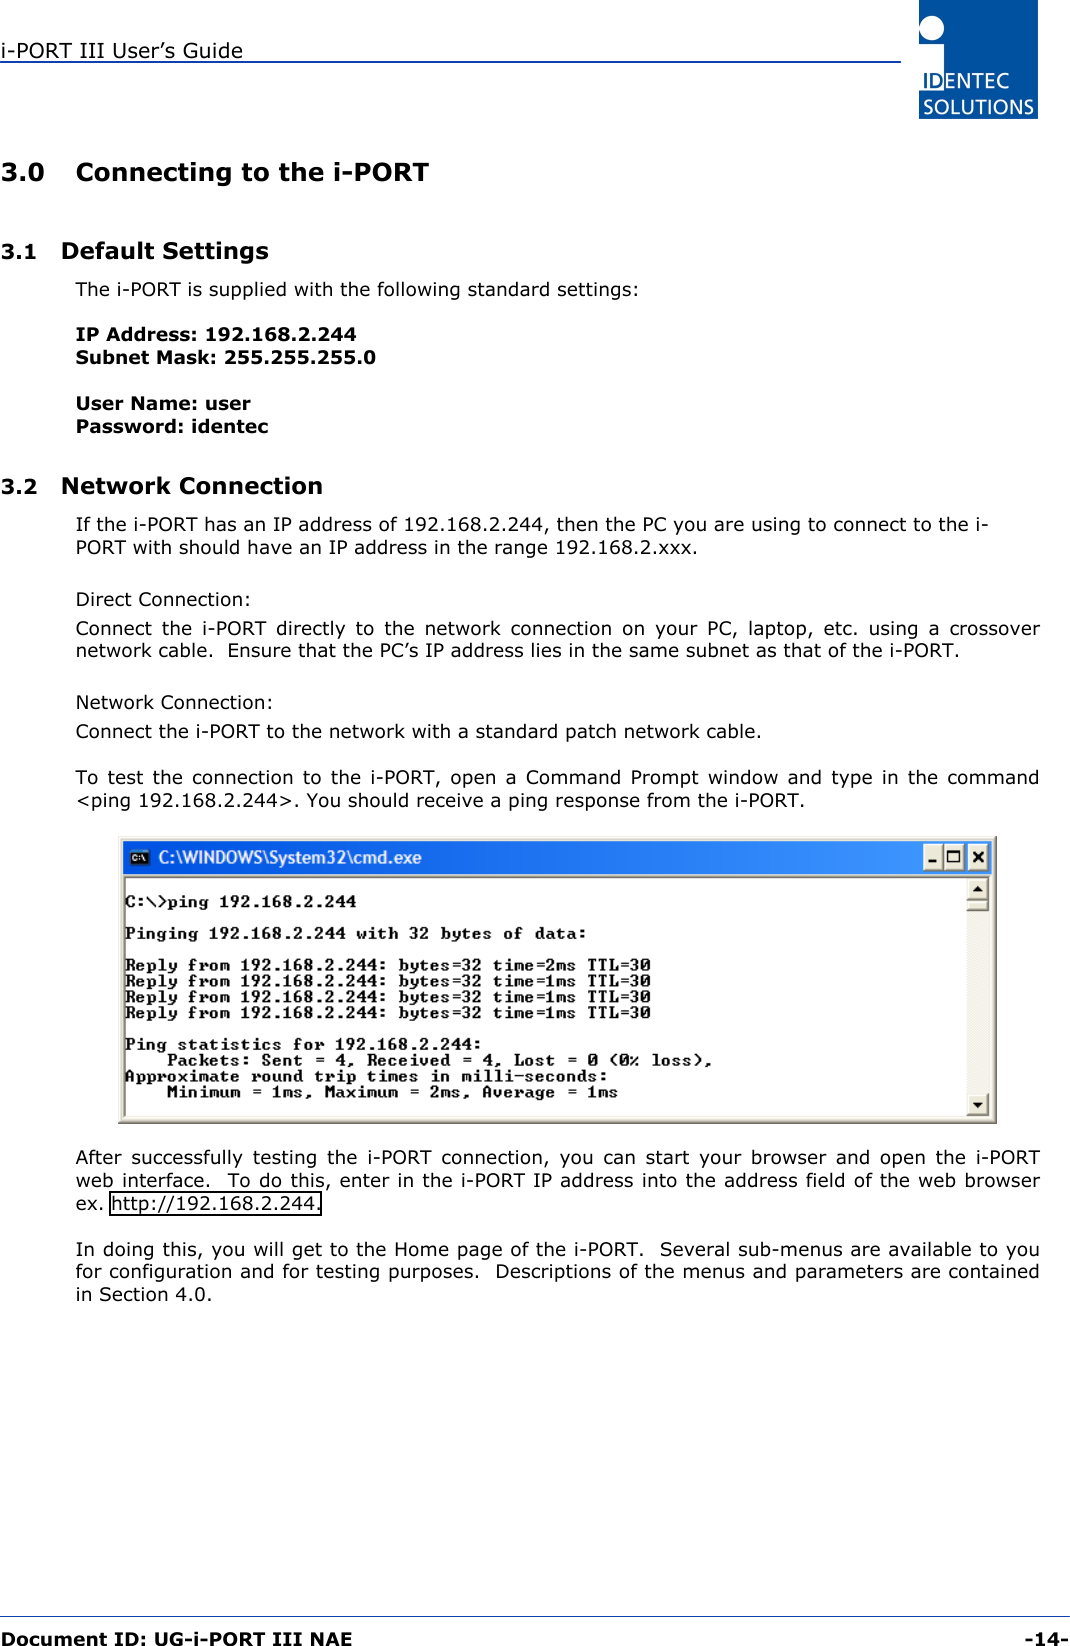 i-PORT III User’s Guide  Document ID: UG-i-PORT III NAE     -14-  3.0  Connecting to the i-PORT  3.1  Default Settings The i-PORT is supplied with the following standard settings:  IP Address: 192.168.2.244 Subnet Mask: 255.255.255.0  User Name: user Password: identec  3.2  Network Connection  If the i-PORT has an IP address of 192.168.2.244, then the PC you are using to connect to the i-PORT with should have an IP address in the range 192.168.2.xxx.  Direct Connection: Connect the i-PORT directly to the network connection on your PC, laptop, etc. using a crossover network cable.  Ensure that the PC’s IP address lies in the same subnet as that of the i-PORT.    Network Connection: Connect the i-PORT to the network with a standard patch network cable.  To test the connection to the i-PORT, open a Command Prompt window and type in the command &lt;ping 192.168.2.244&gt;. You should receive a ping response from the i-PORT.     After successfully testing the i-PORT connection, you can start your browser and open the i-PORT web interface.  To do this, enter in the i-PORT IP address into the address field of the web browser ex. http://192.168.2.244.  In doing this, you will get to the Home page of the i-PORT.  Several sub-menus are available to you for configuration and for testing purposes.  Descriptions of the menus and parameters are contained in Section 4.0. 